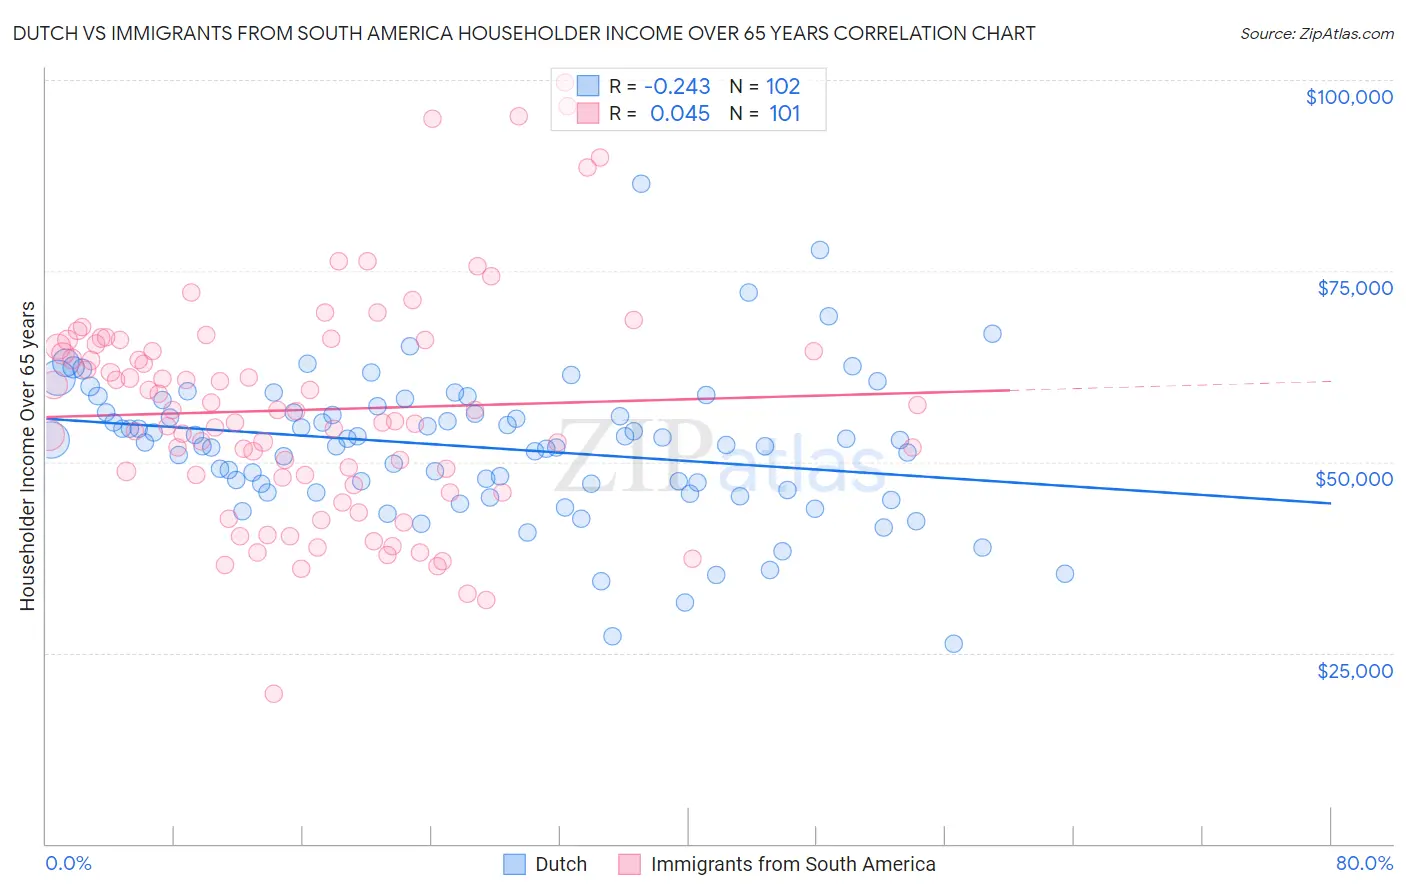 Dutch vs Immigrants from South America Householder Income Over 65 years